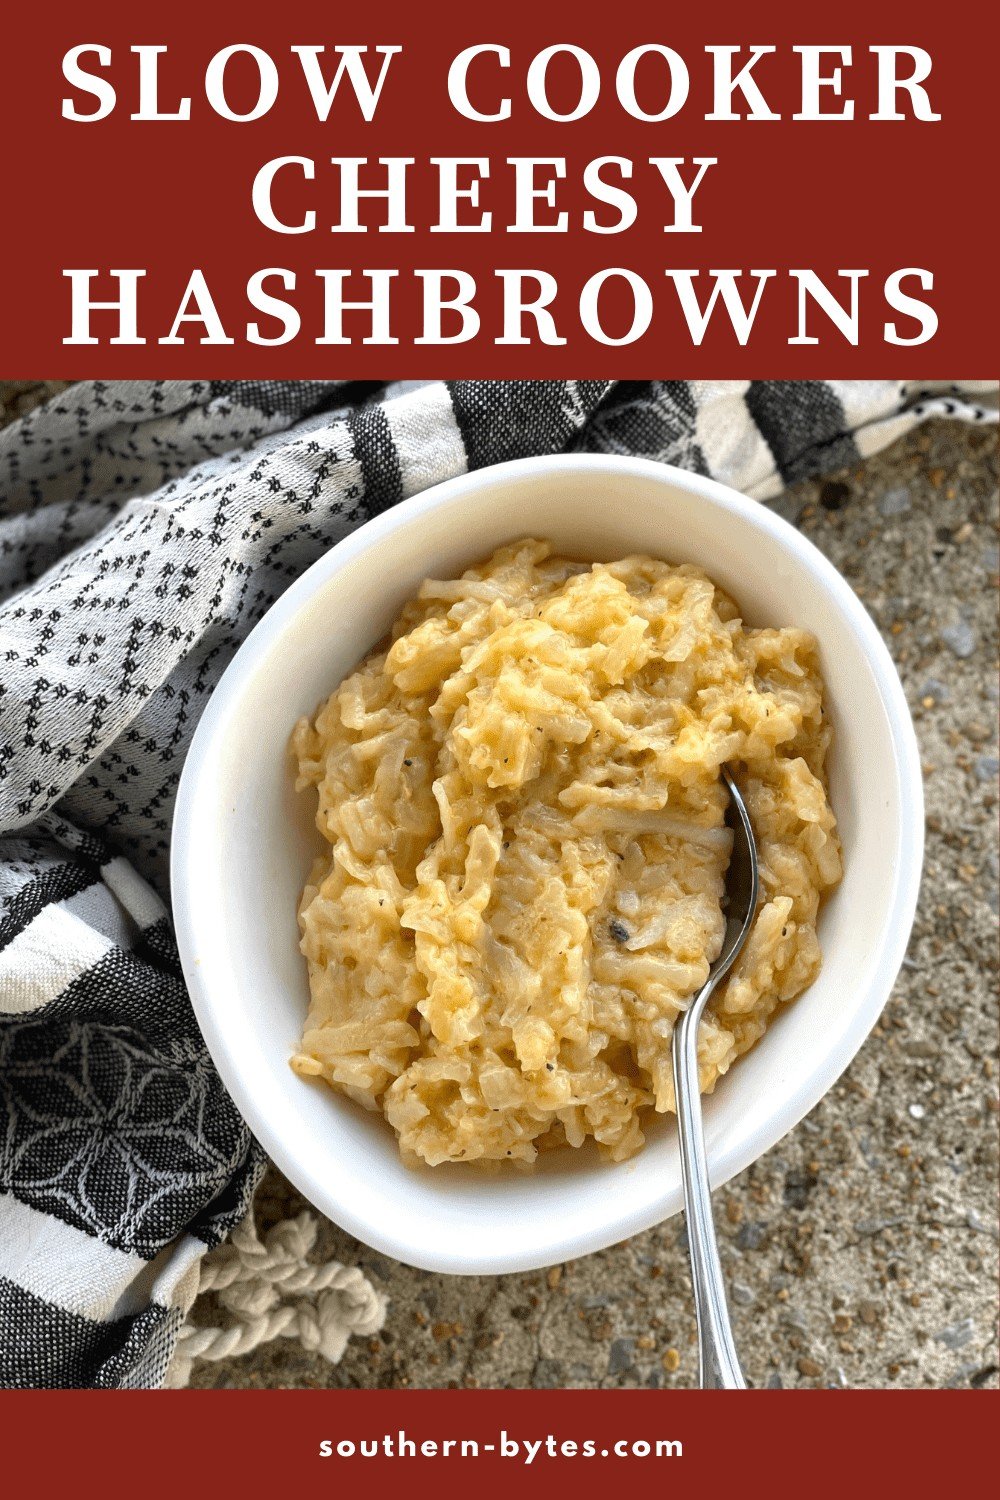 A pin image of slow cooker cheesy hash browns in a white bowl.